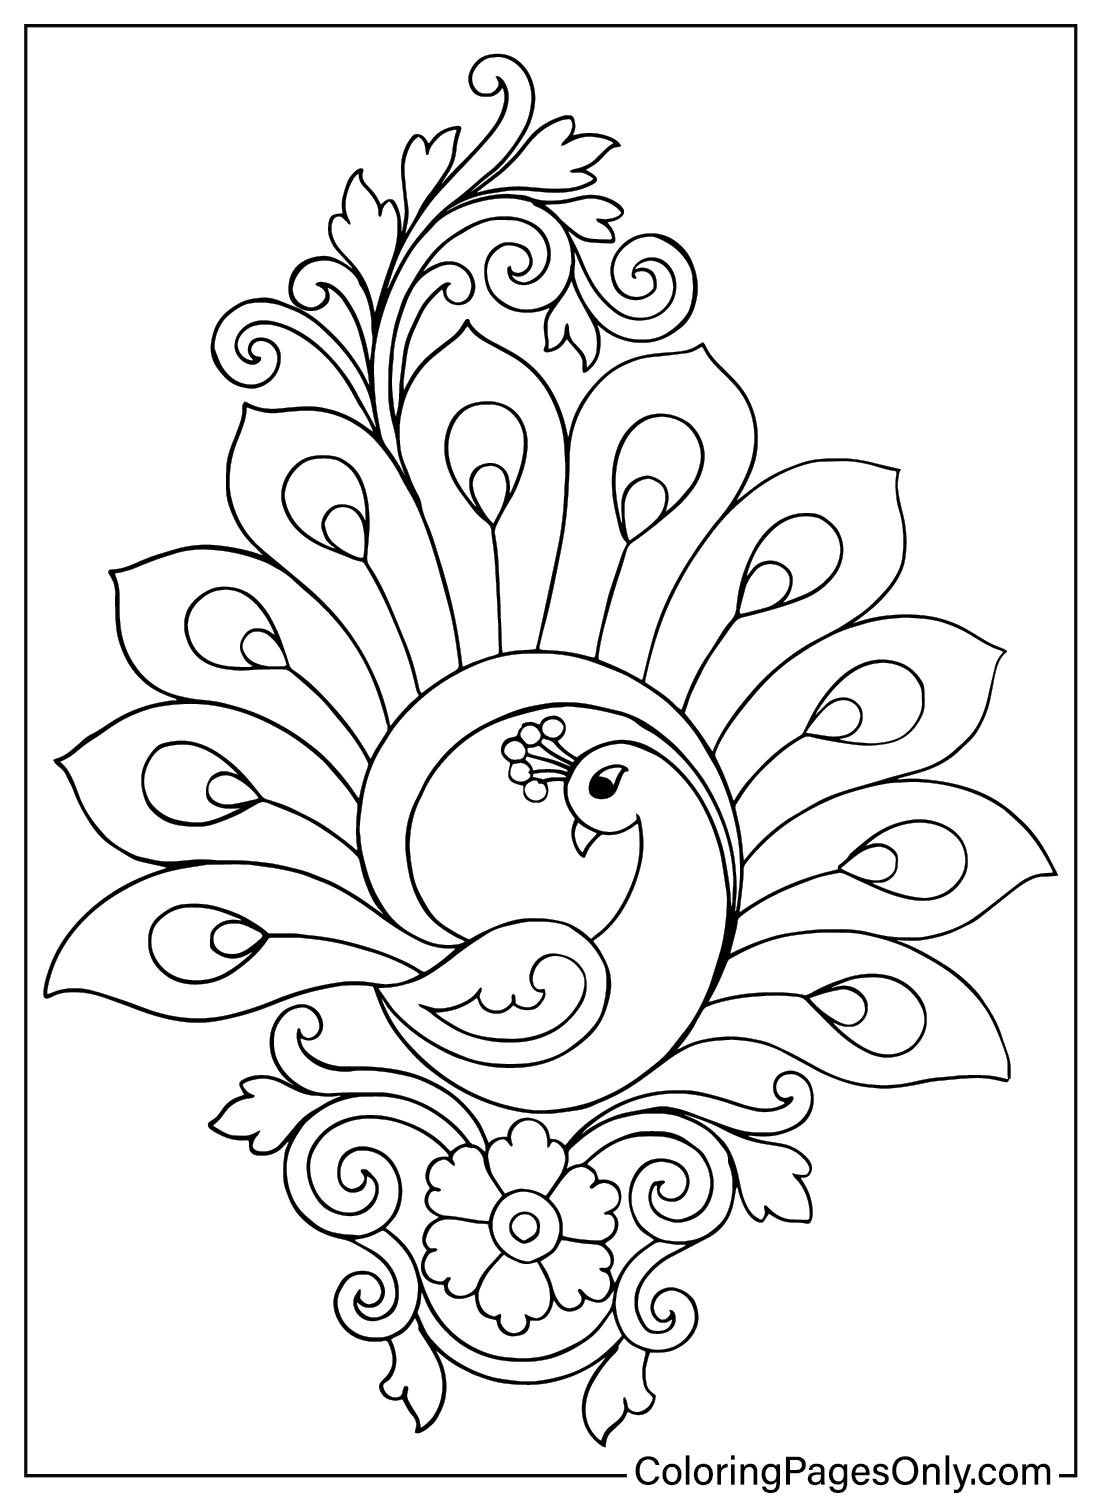 Rangoli Pictures Coloring Page